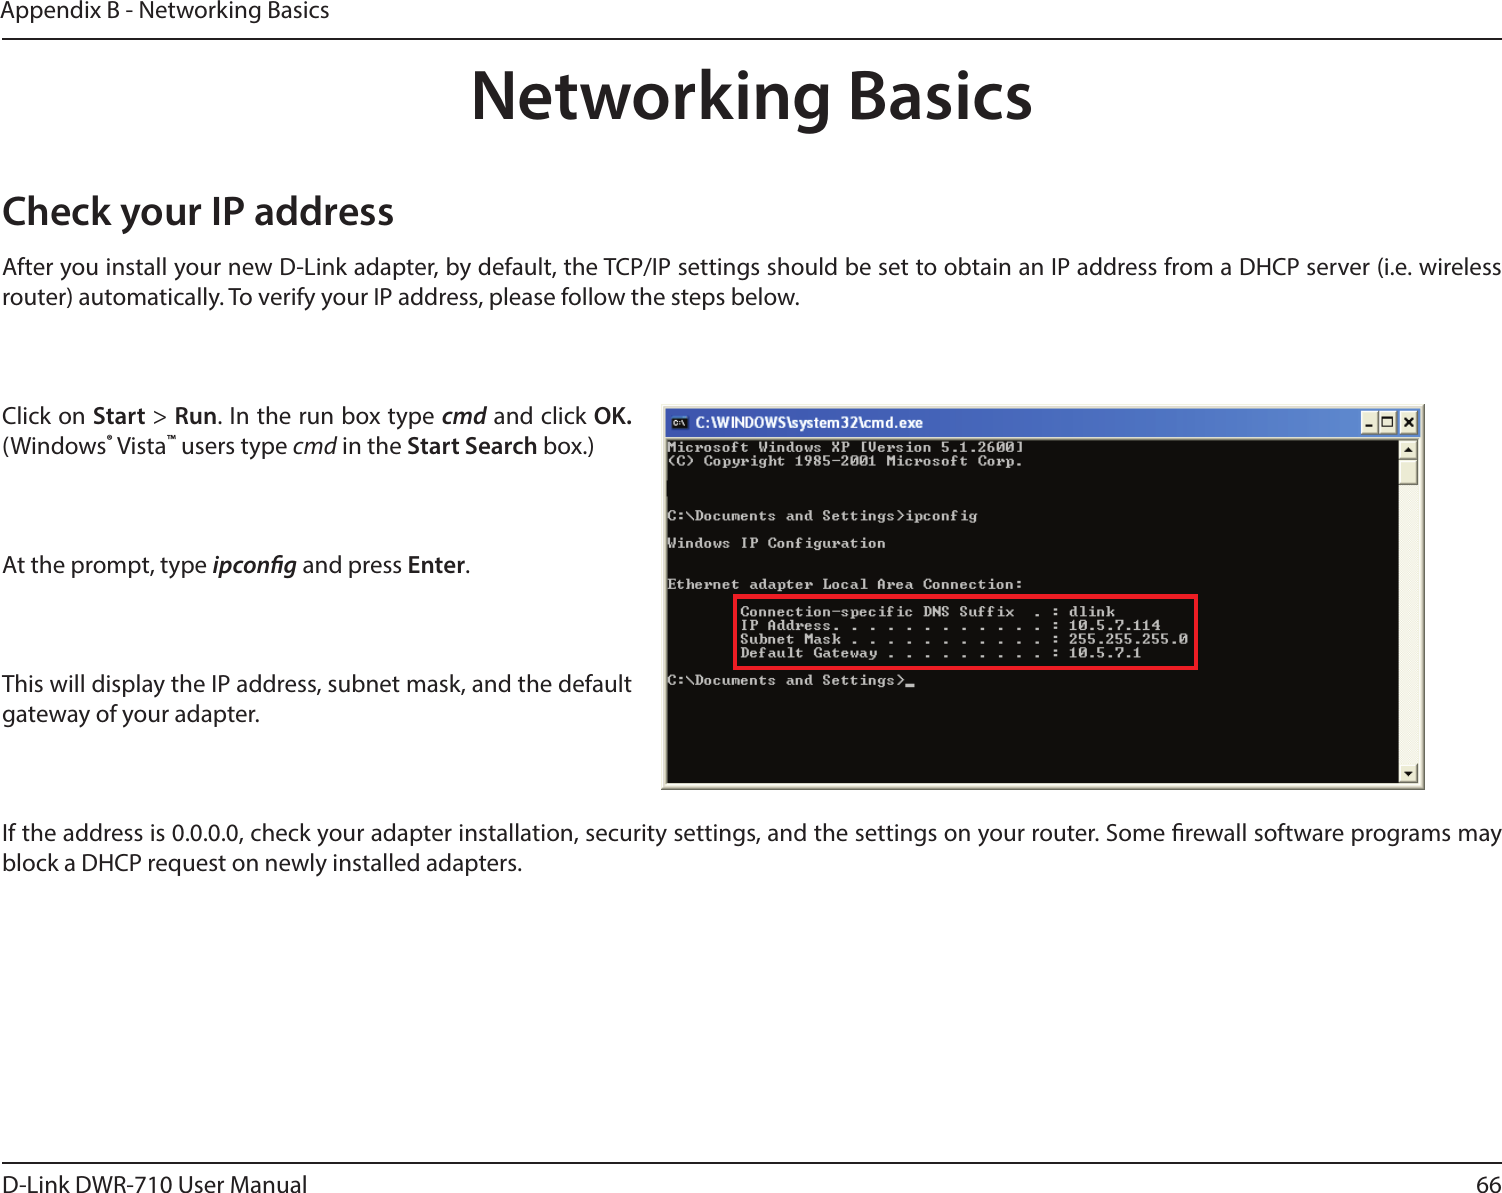 66D-Link DWR-710 User ManualAppendix B - Networking BasicsNetworking BasicsCheck your IP addressAfter you install your new D-Link adapter, by default, the TCP/IP settings should be set to obtain an IP address from a DHCP server (i.e. wireless router) automatically. To verify your IP address, please follow the steps below.Click on Start &gt; Run. In the run box type cmd and click OK. (Windows® Vista™ users type cmd in the Start Search box.)At the prompt, type ipcong and press Enter.This will display the IP address, subnet mask, and the default gateway of your adapter.If the address is 0.0.0.0, check your adapter installation, security settings, and the settings on your router. Some rewall software programs may block a DHCP request on newly installed adapters. 